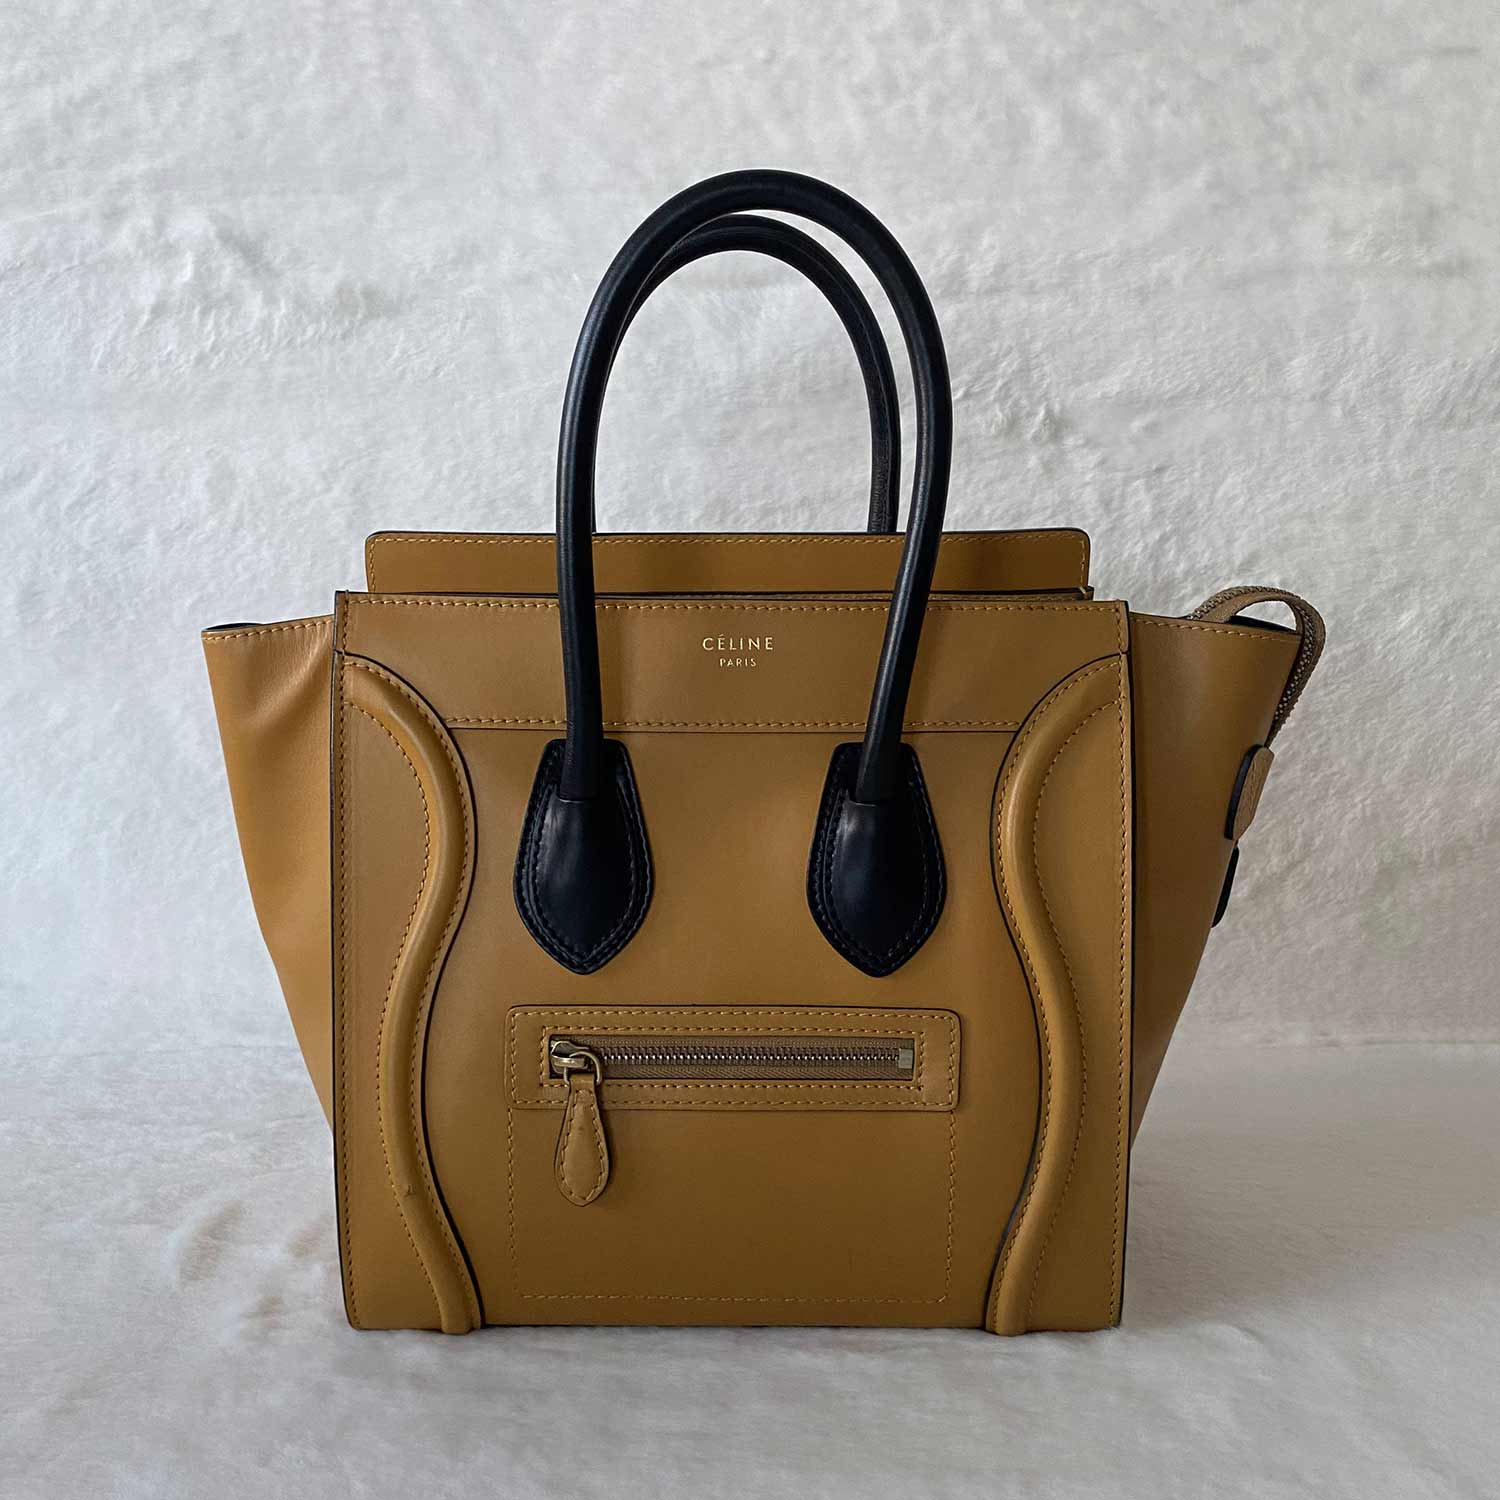 Shop authentic Céline Micro Luggage Tote Bag at revogue for just USD ...